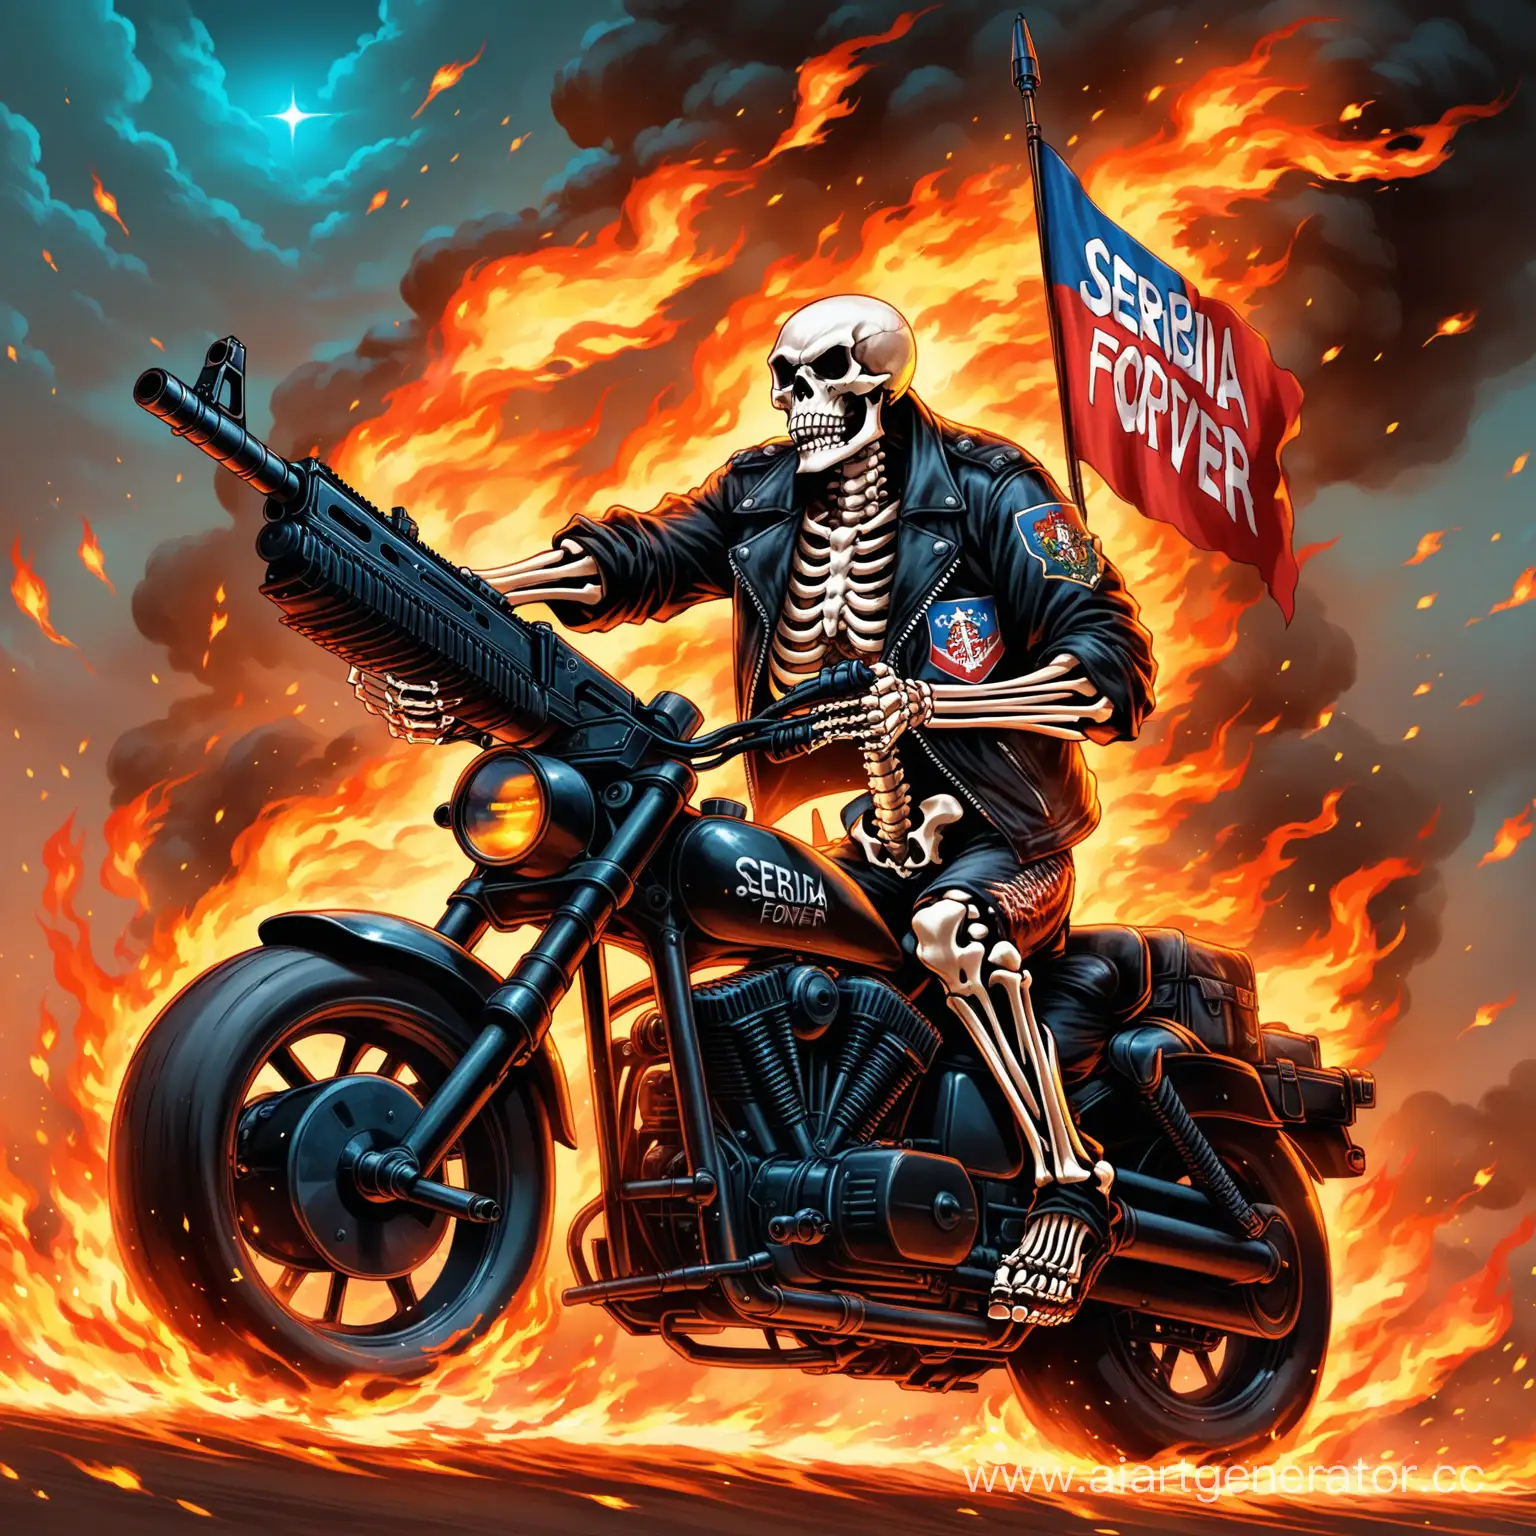 badass angry biker skeleton holding an assault rifle while sitting on a burning motorcycle with an inscription SERBIA FOREVER in the sky